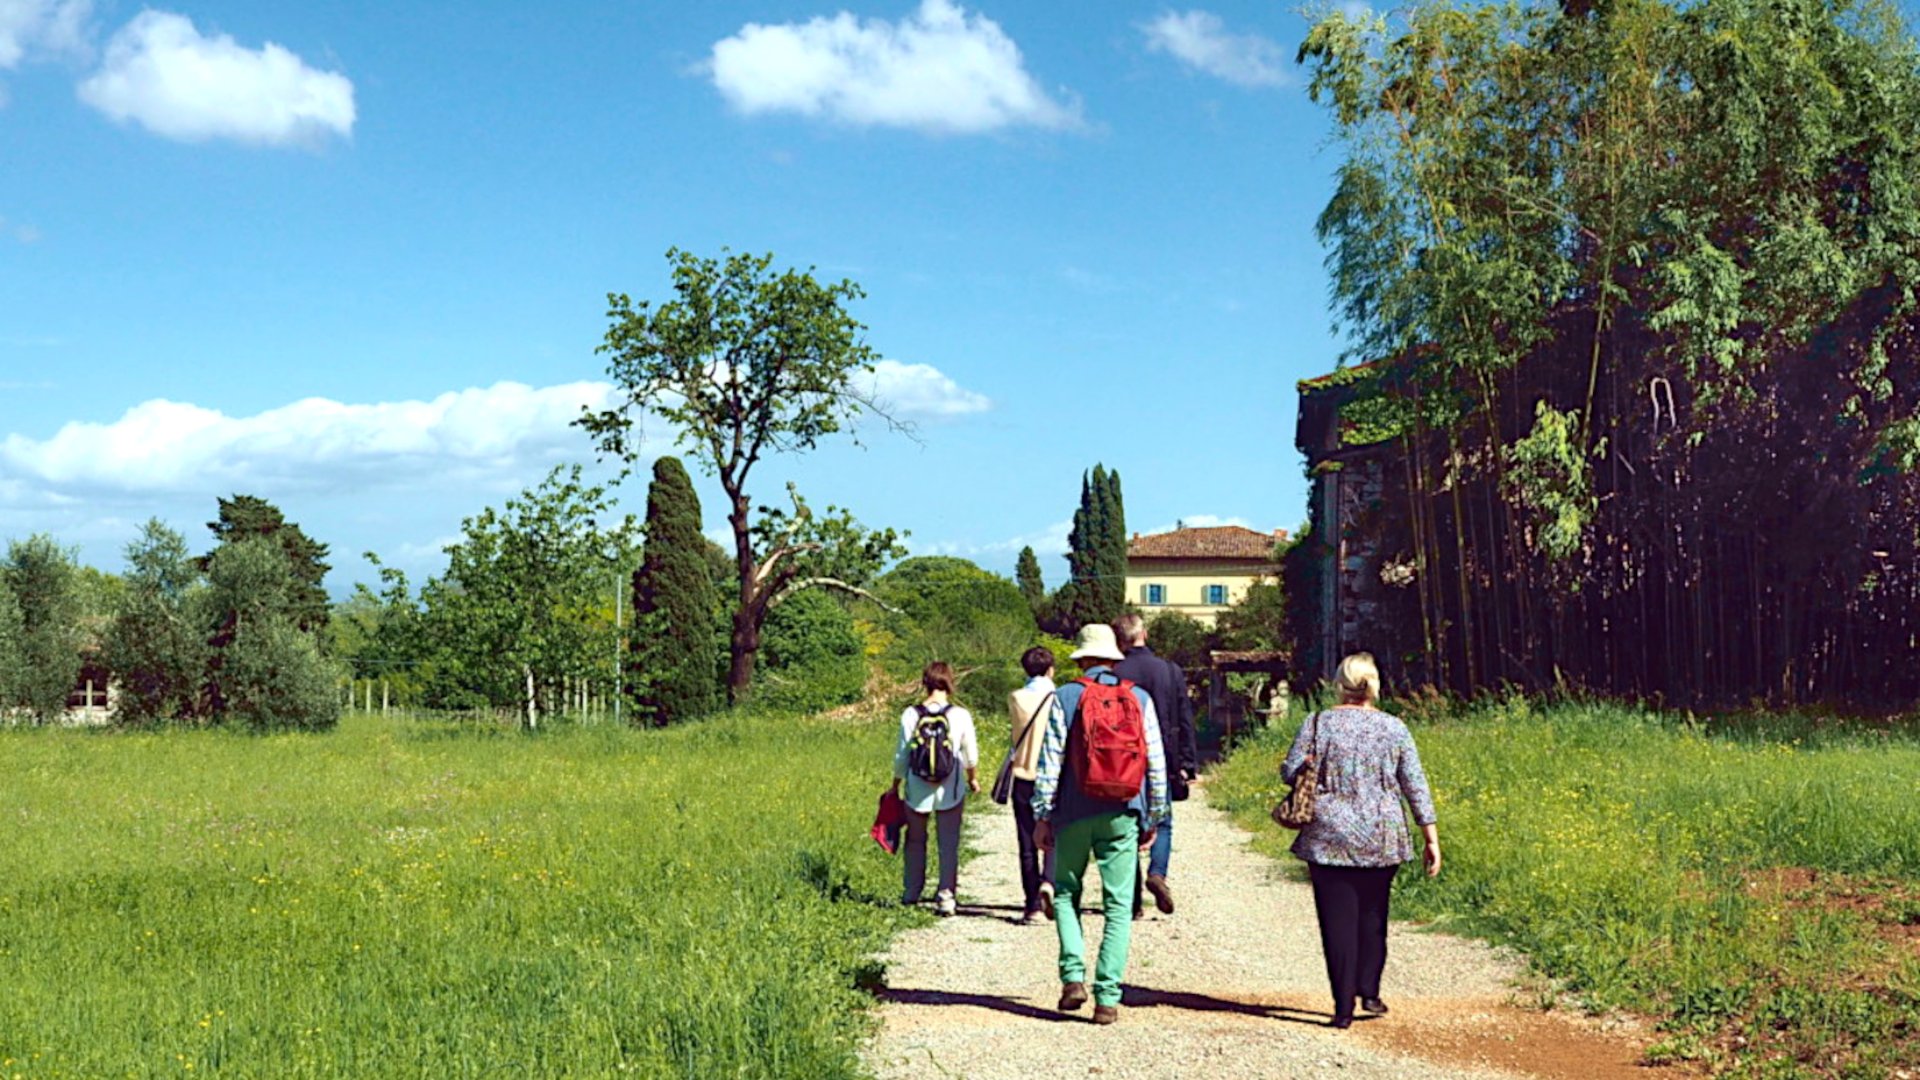 Walking tour outside the city walls of Lucca with tasting in a farm